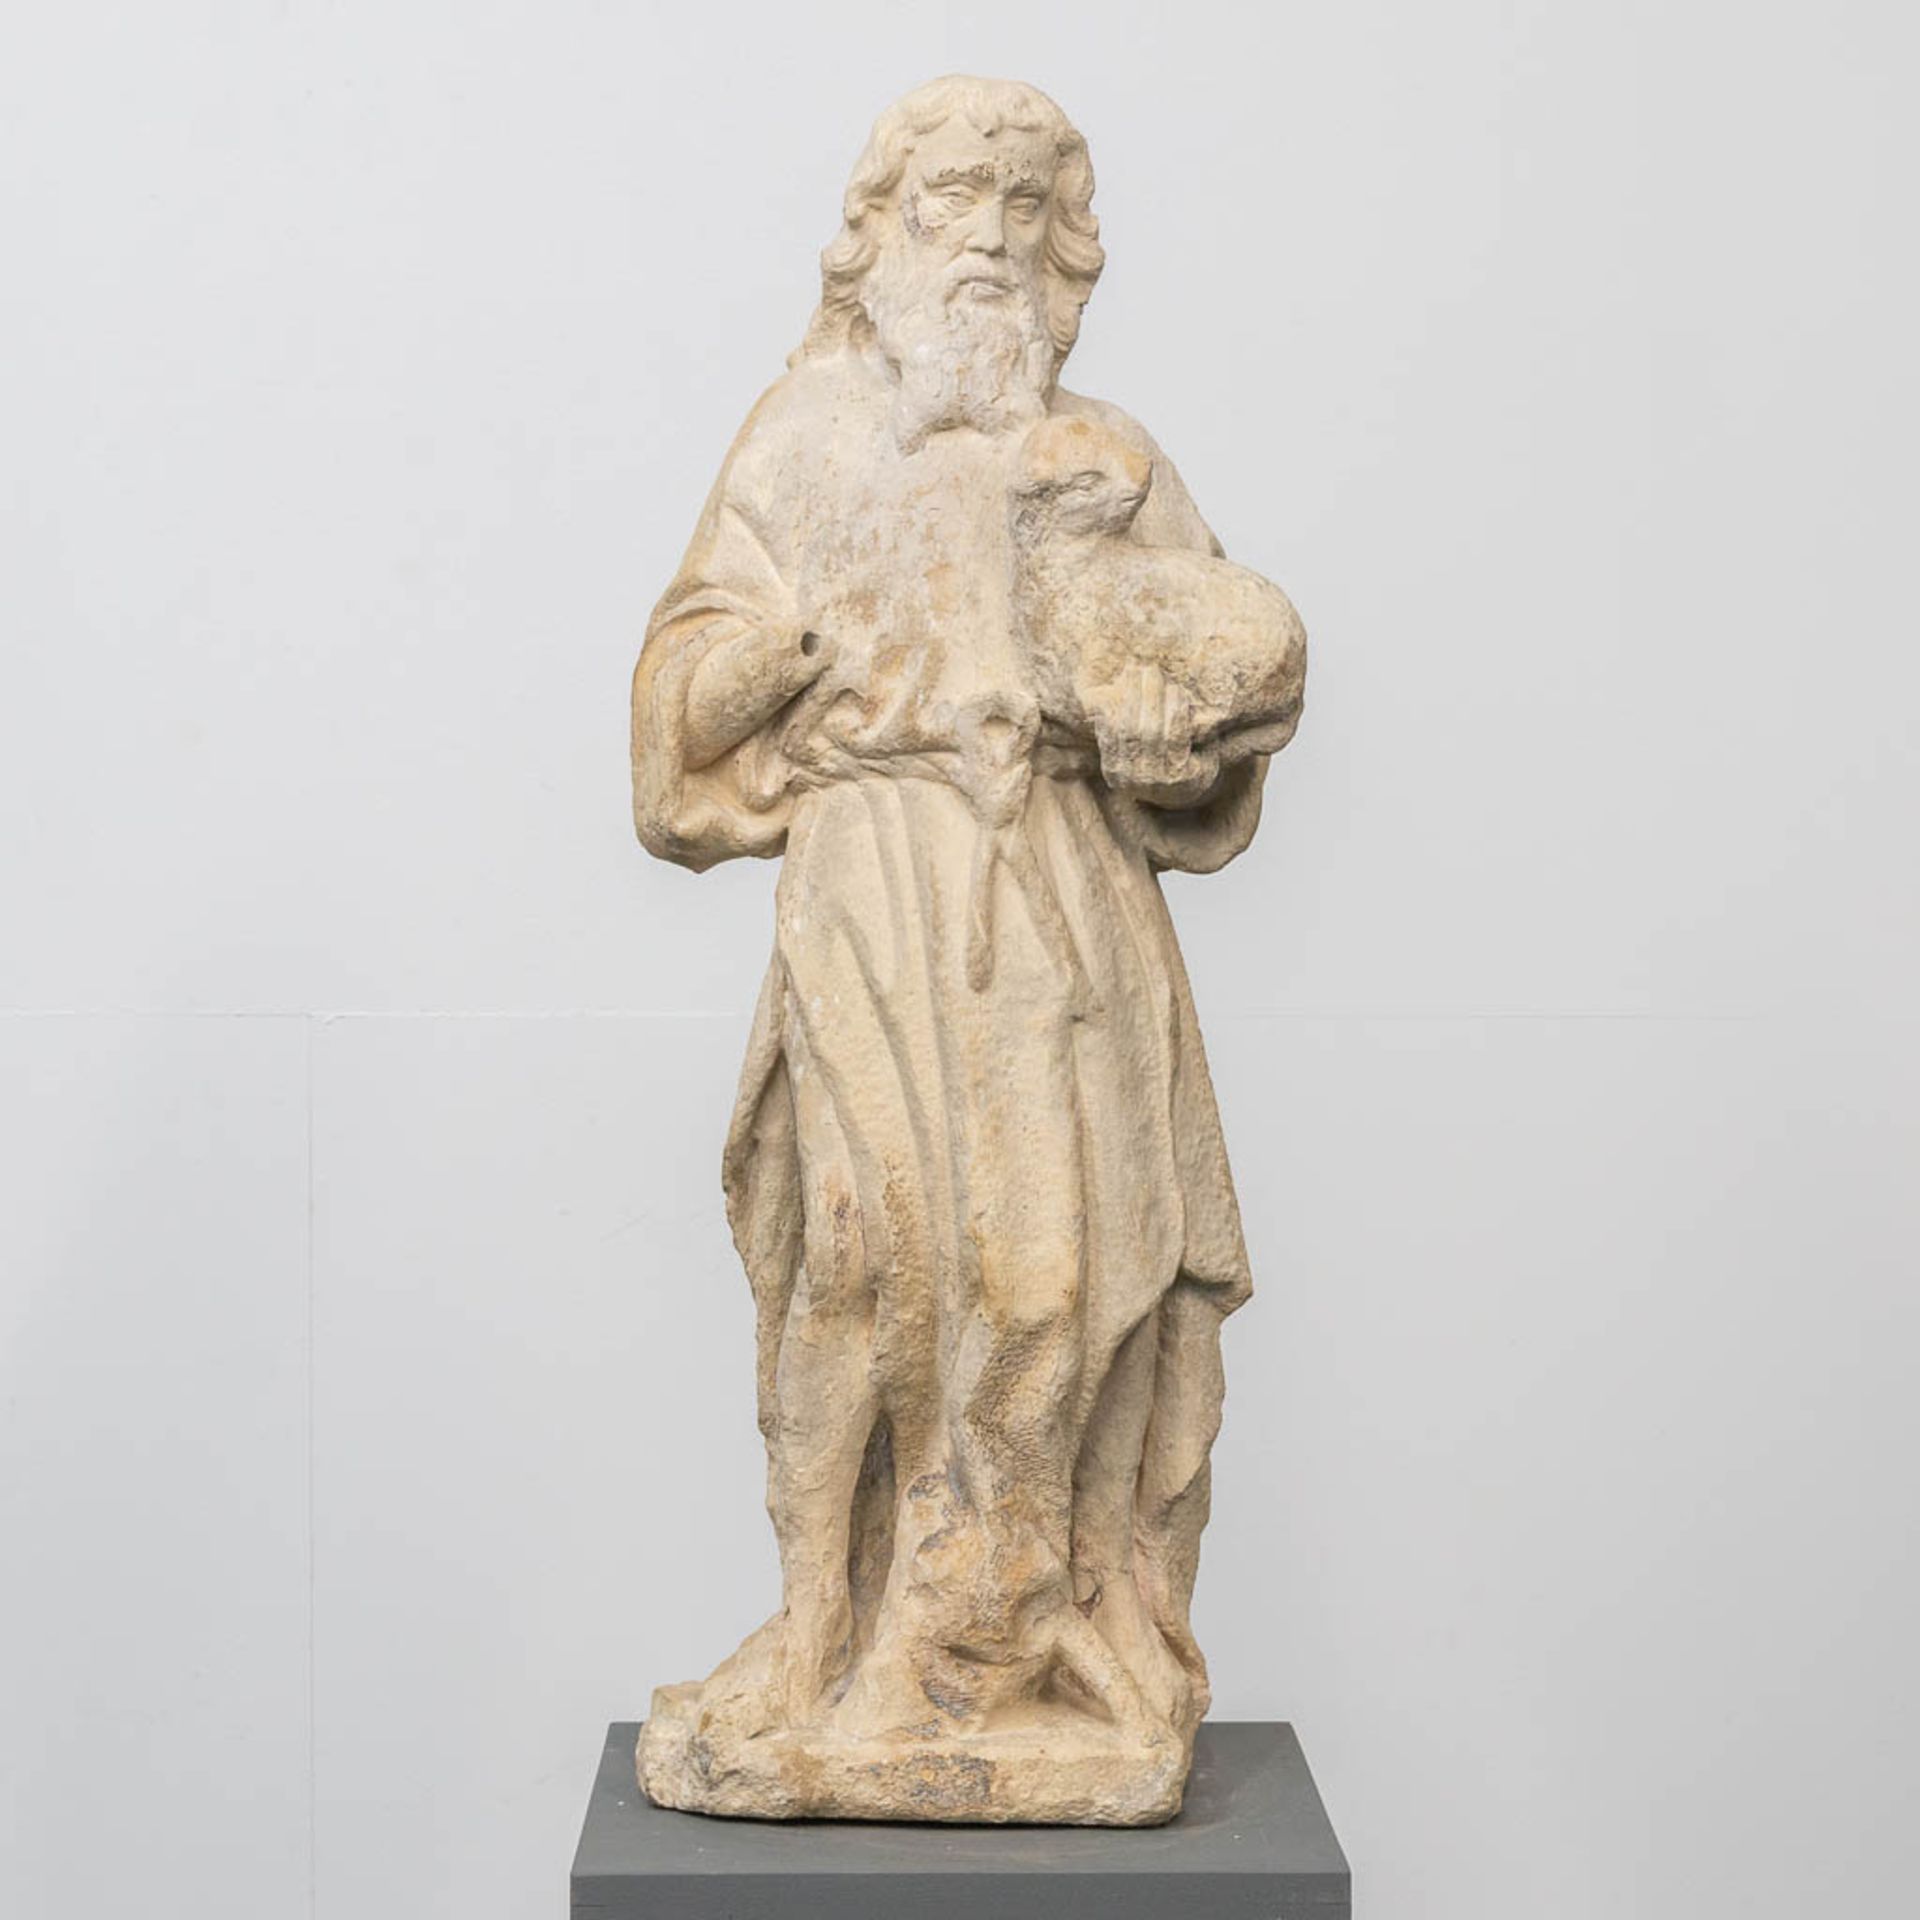 An antique statue of 'John The Baptist' with the lamb, made of sculptured stone.